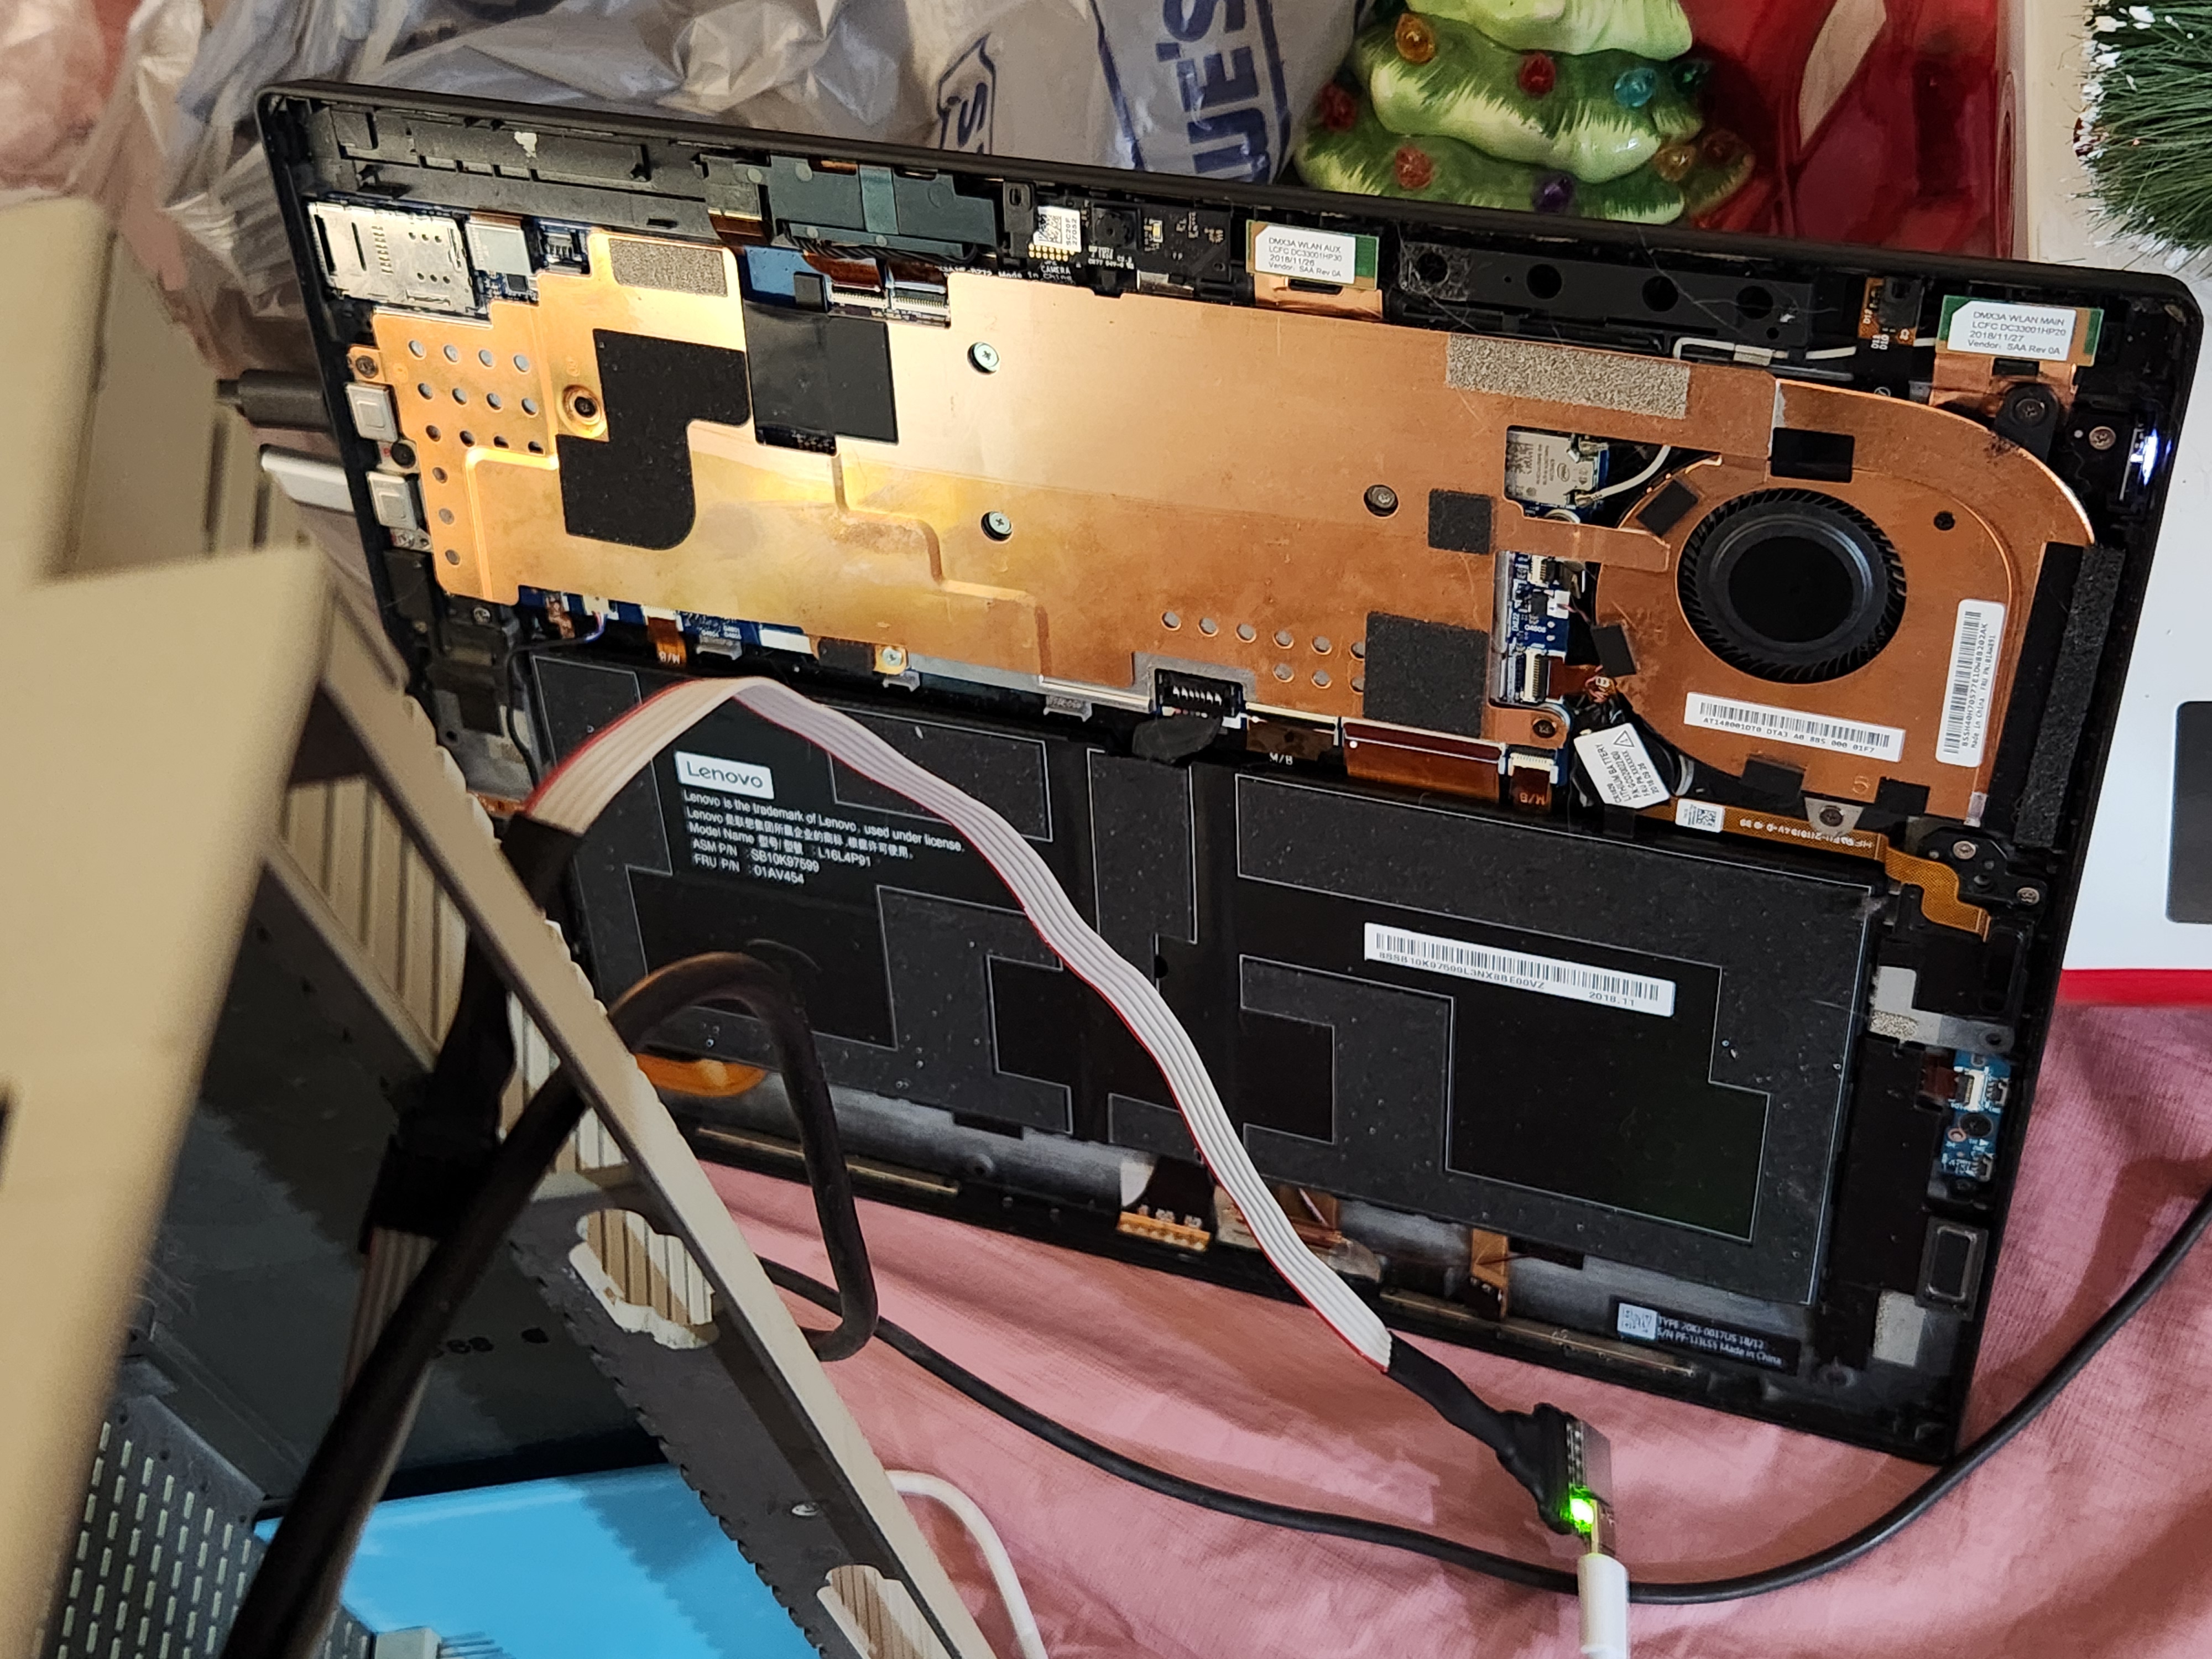 And in case anyone cares to know, the wizard behind the curtain is the guts of a Lenovo X1 Tablet Gen 3 with a Core i7 running Windows 10.  Still working out the specifics of where and how it's going inside the case.  There's also a port replicator to supply additional I/O.  But my promise to make it 100% reversible makes exposing that I/O... &quot;interesting&quot;.